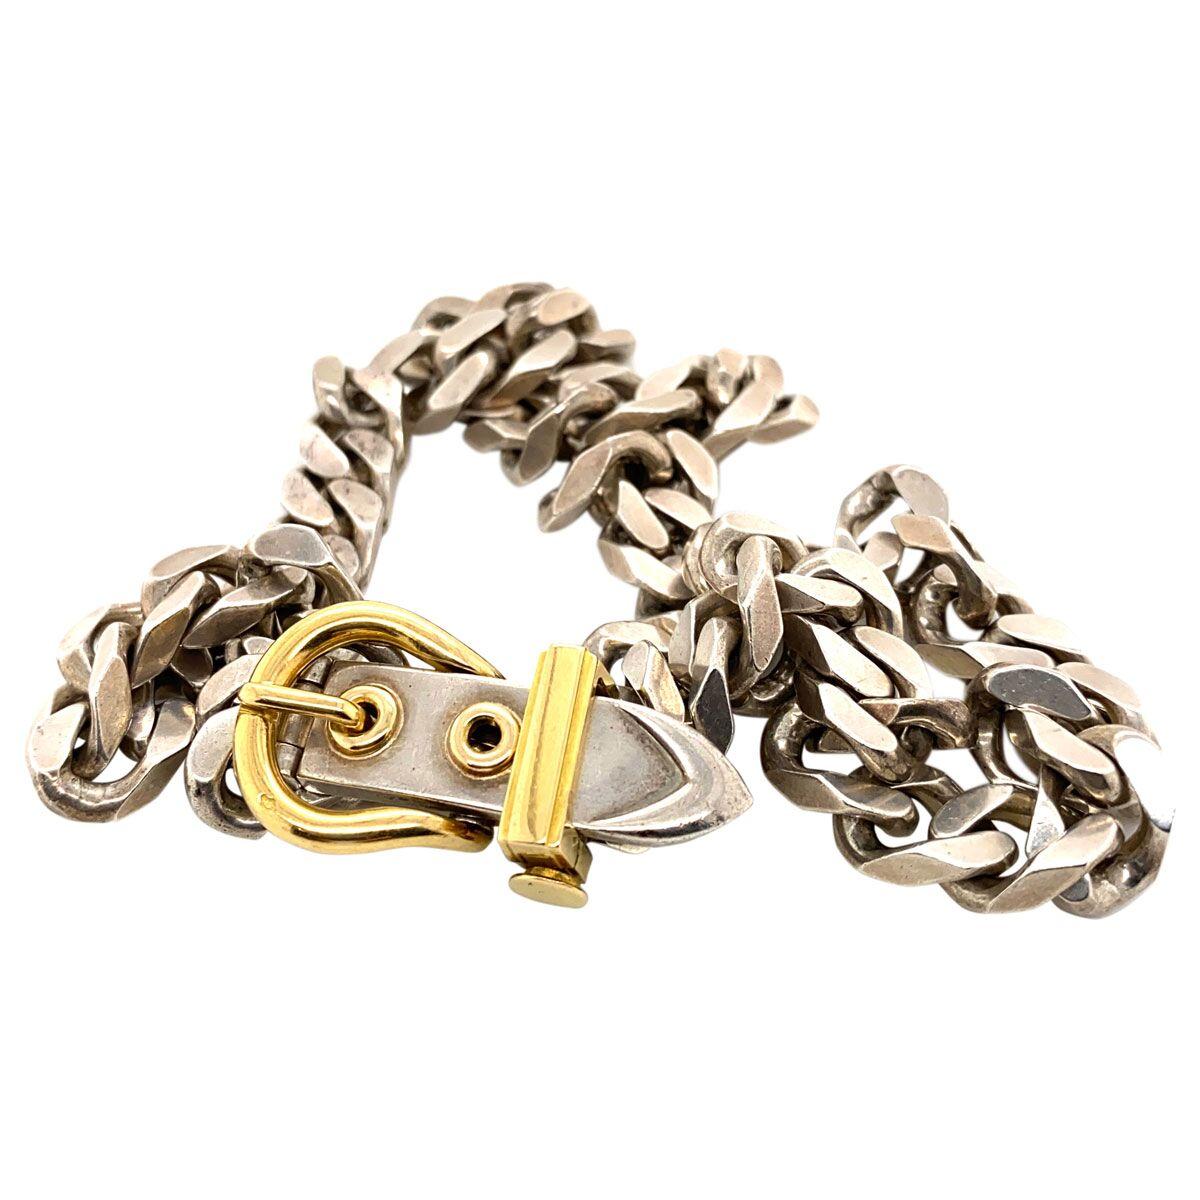 Wow, this is so stylish! A look that will take you from a casual event to a more formal outing - it's great to have jewels that are versatile and suitable for almost every occasion. This fabulous Hermes sterling silver curb link chain sits flat on